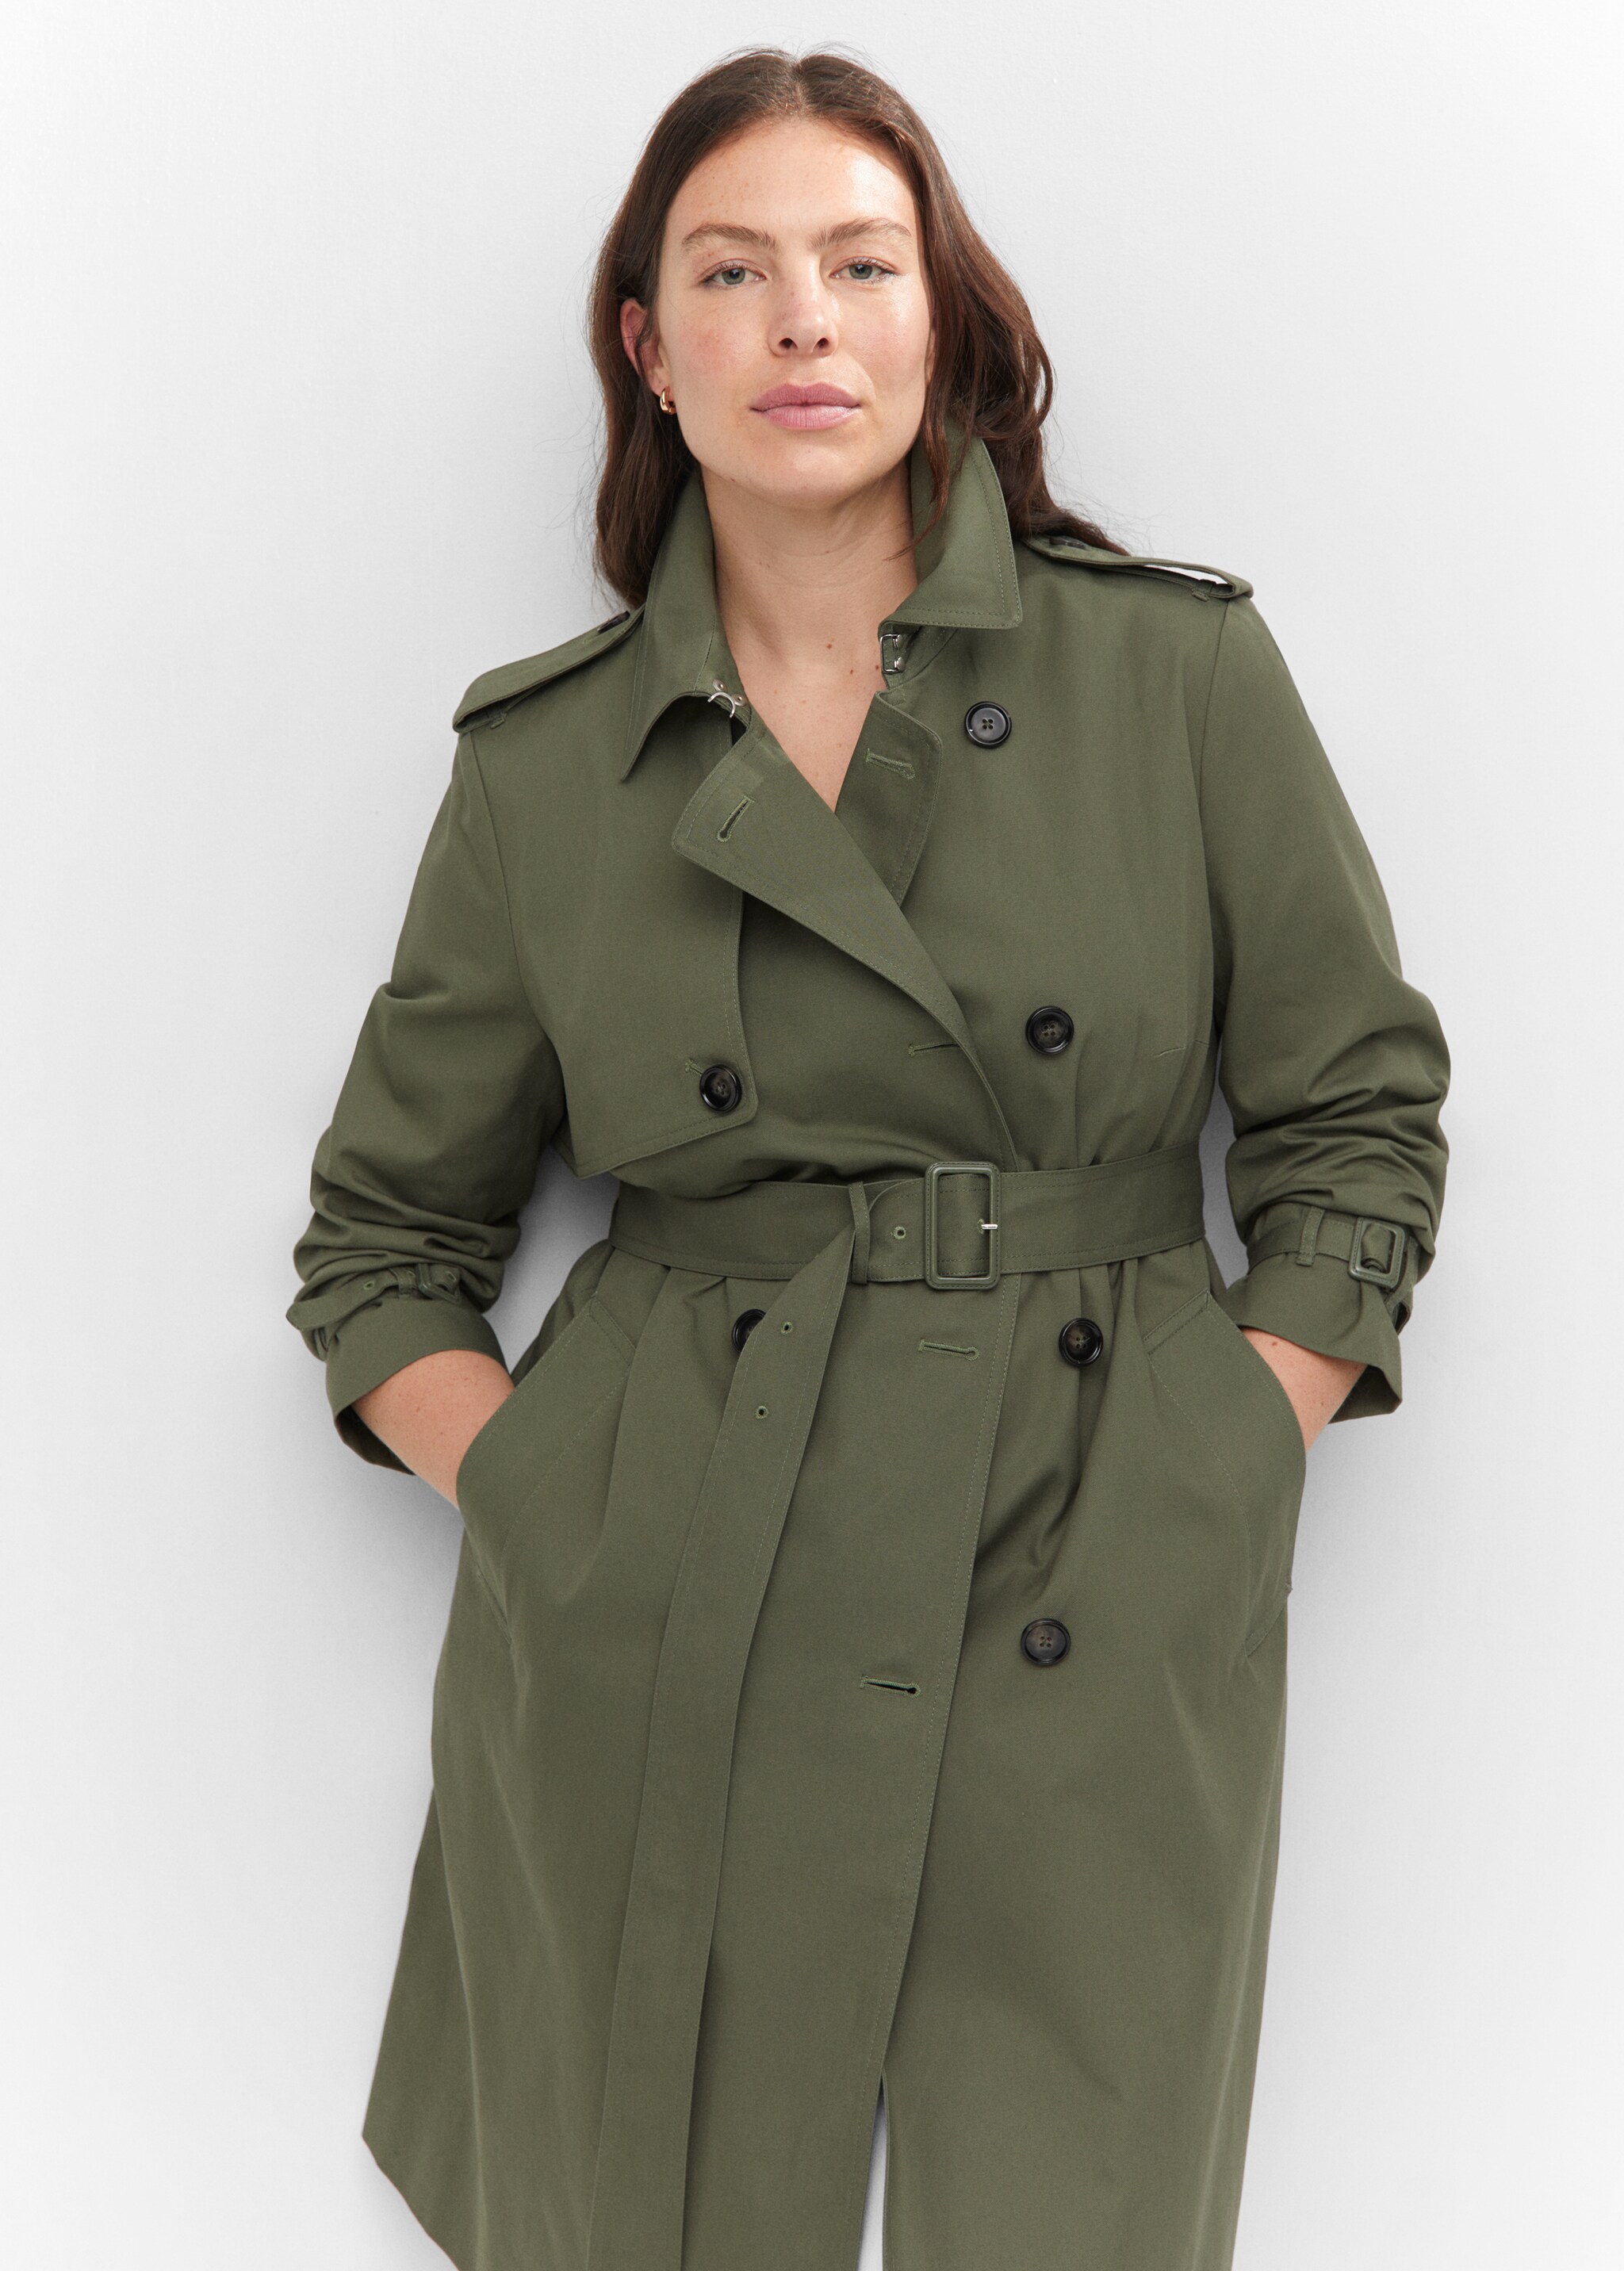 Classic trench coat with belt - Details of the article 5